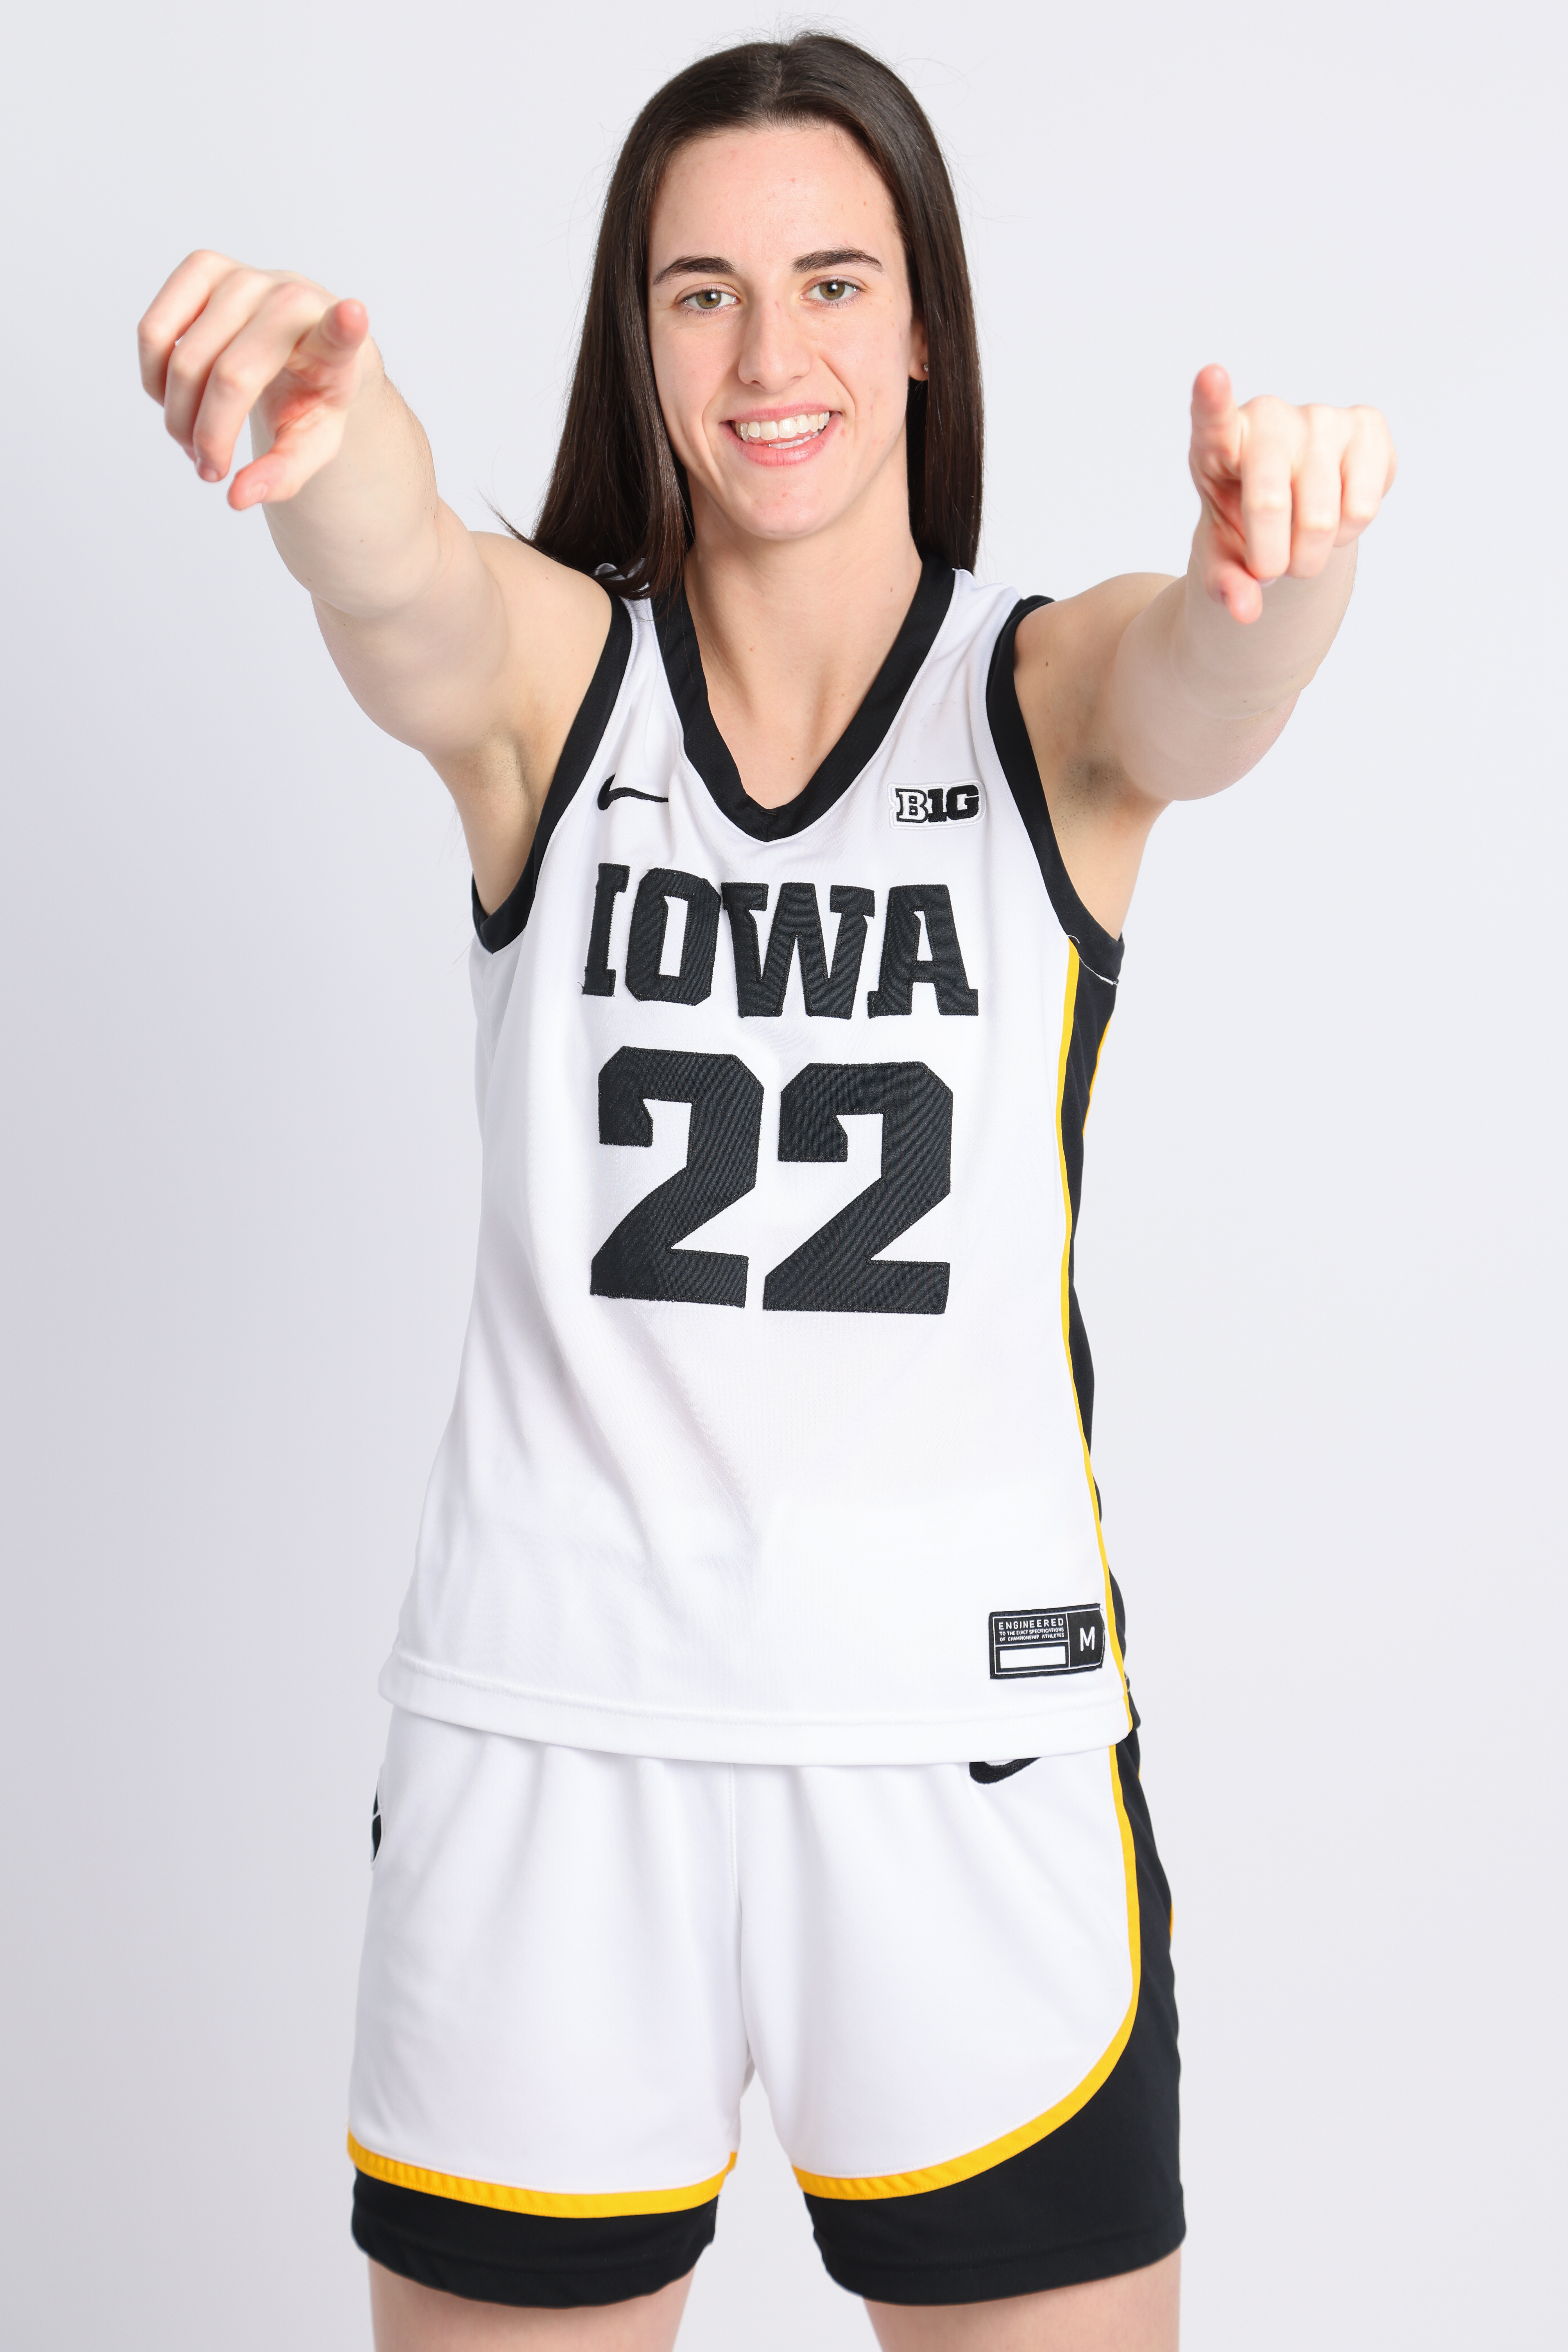 Caitlin Clark of the Iowa Hawkeyes poses for a portrait during media day at 2023 NCAA Women’s Basketball Final Four at the at the Kay Bailey Hutchison Convention Center on March 29, 2023 in Dallas, Texas.